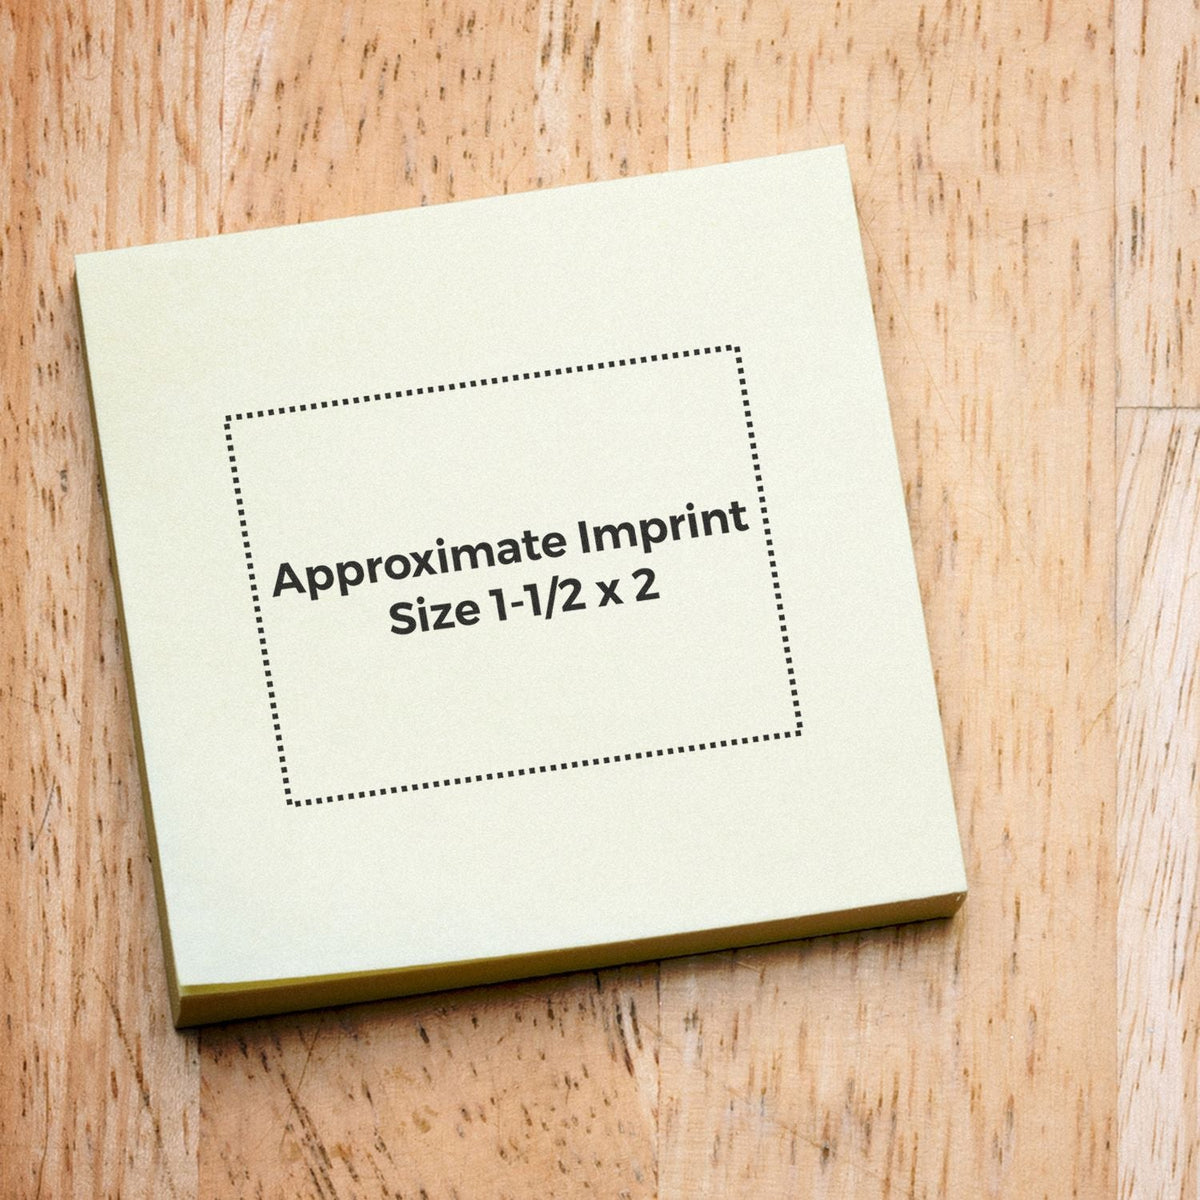 regular rubber stamp size 1 1 2 x 2 size dimensions overlay